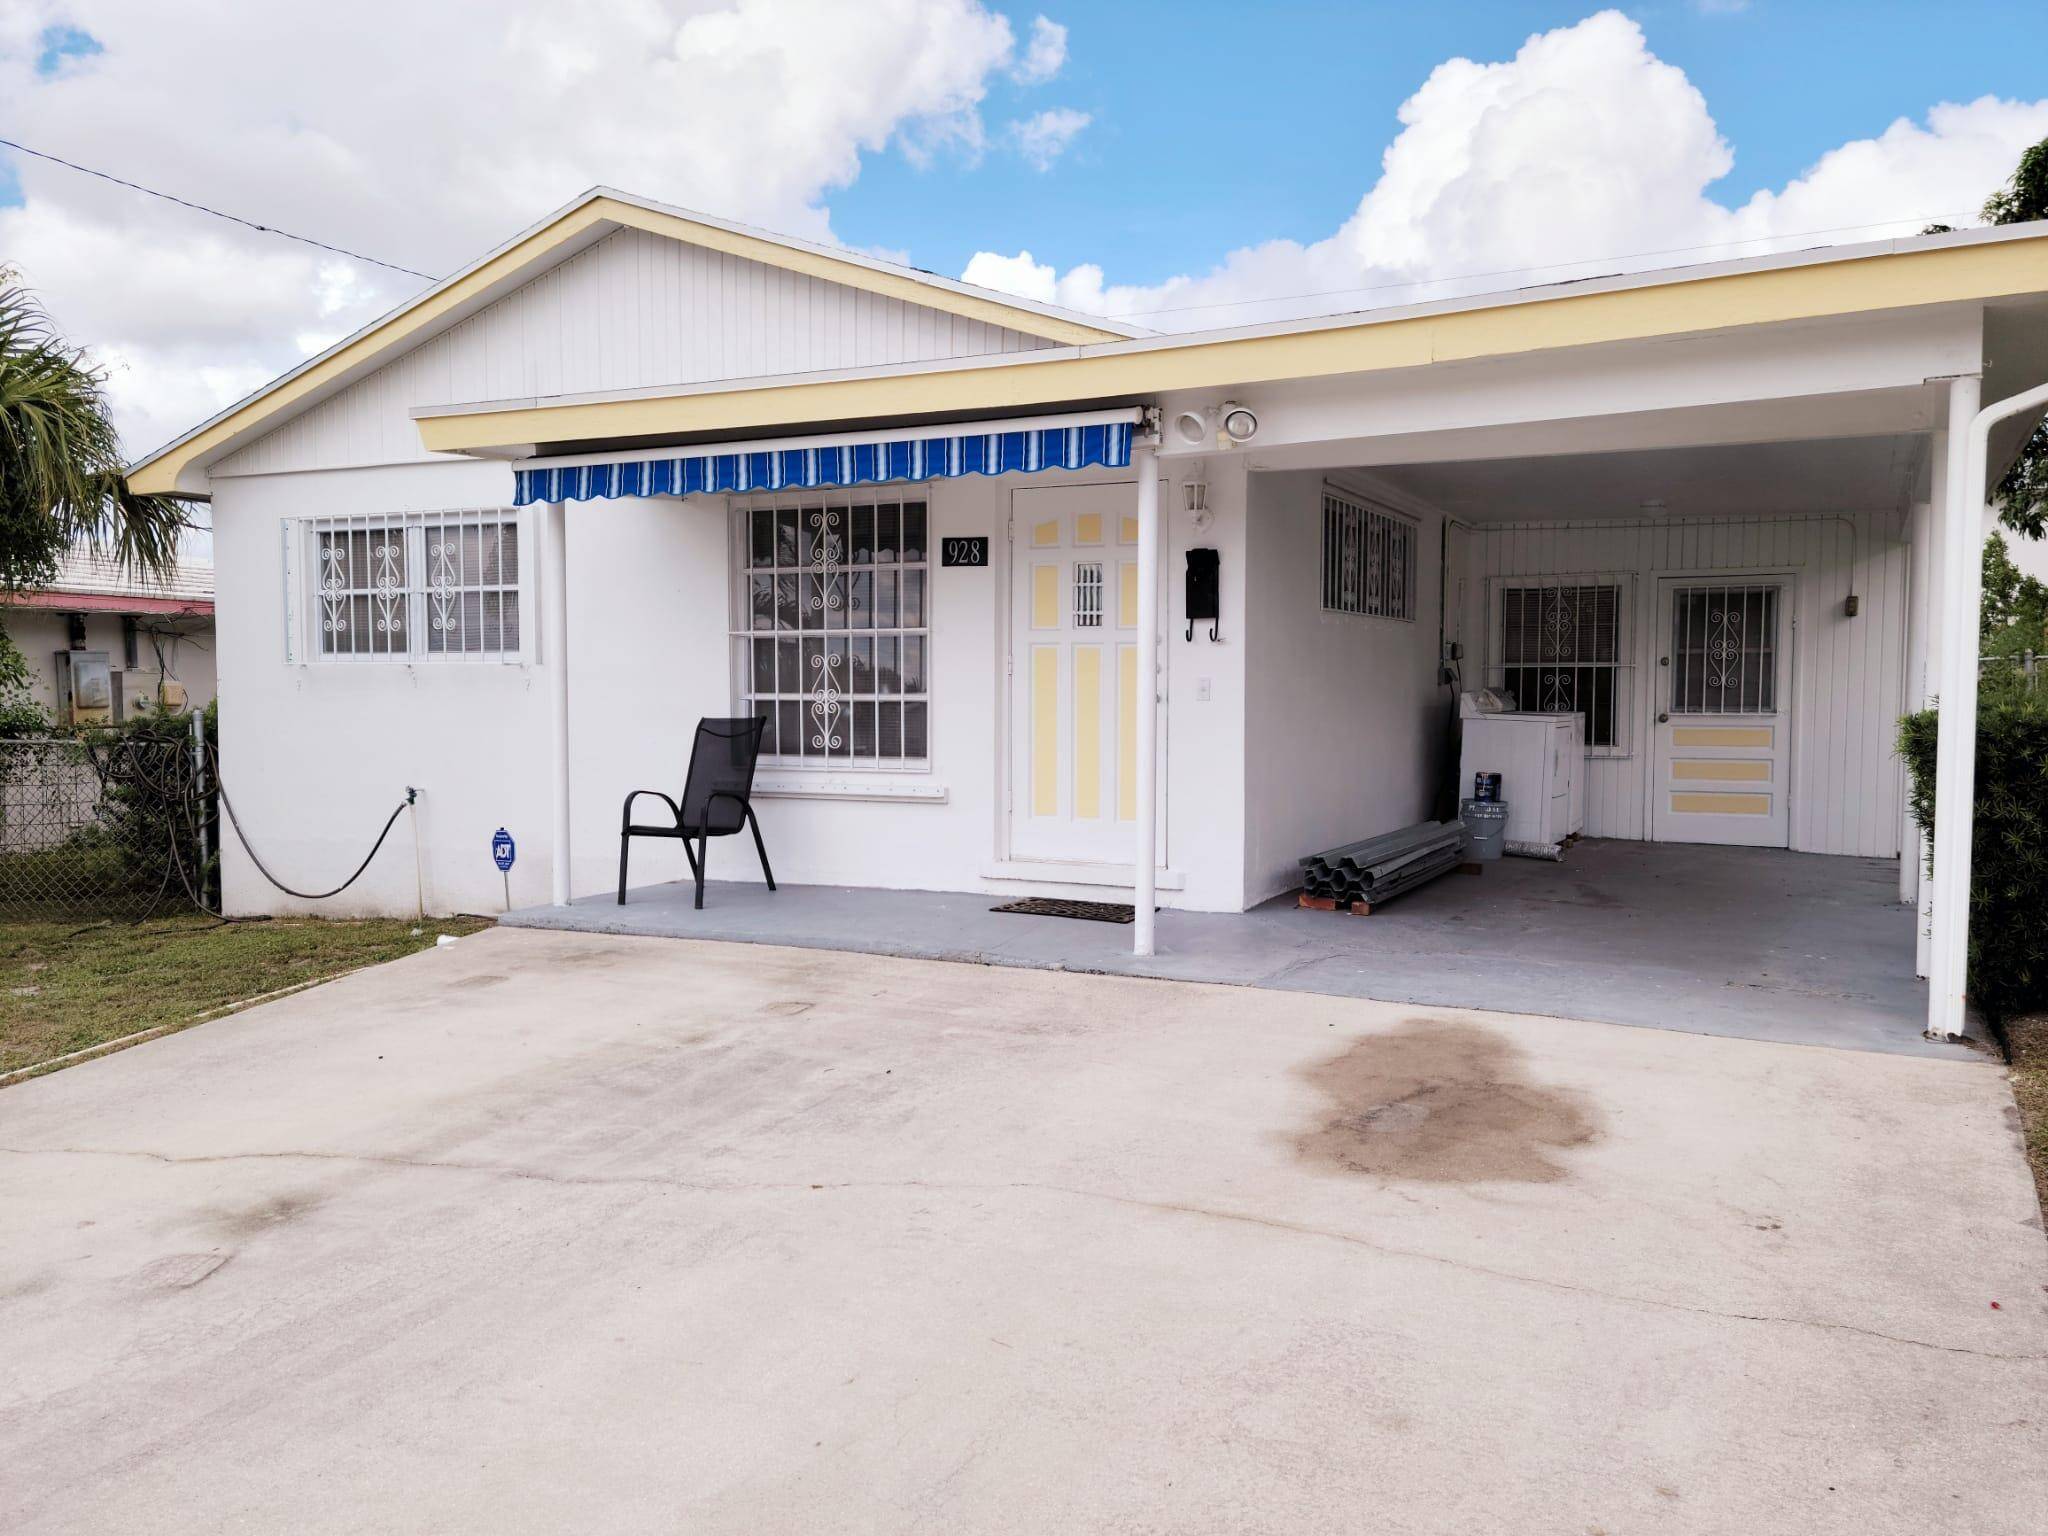 Cozy and bright single family home with no HOA, spacious bedrooms and closets, florida room with separate entrance and terrazzo flooring throughout the house.